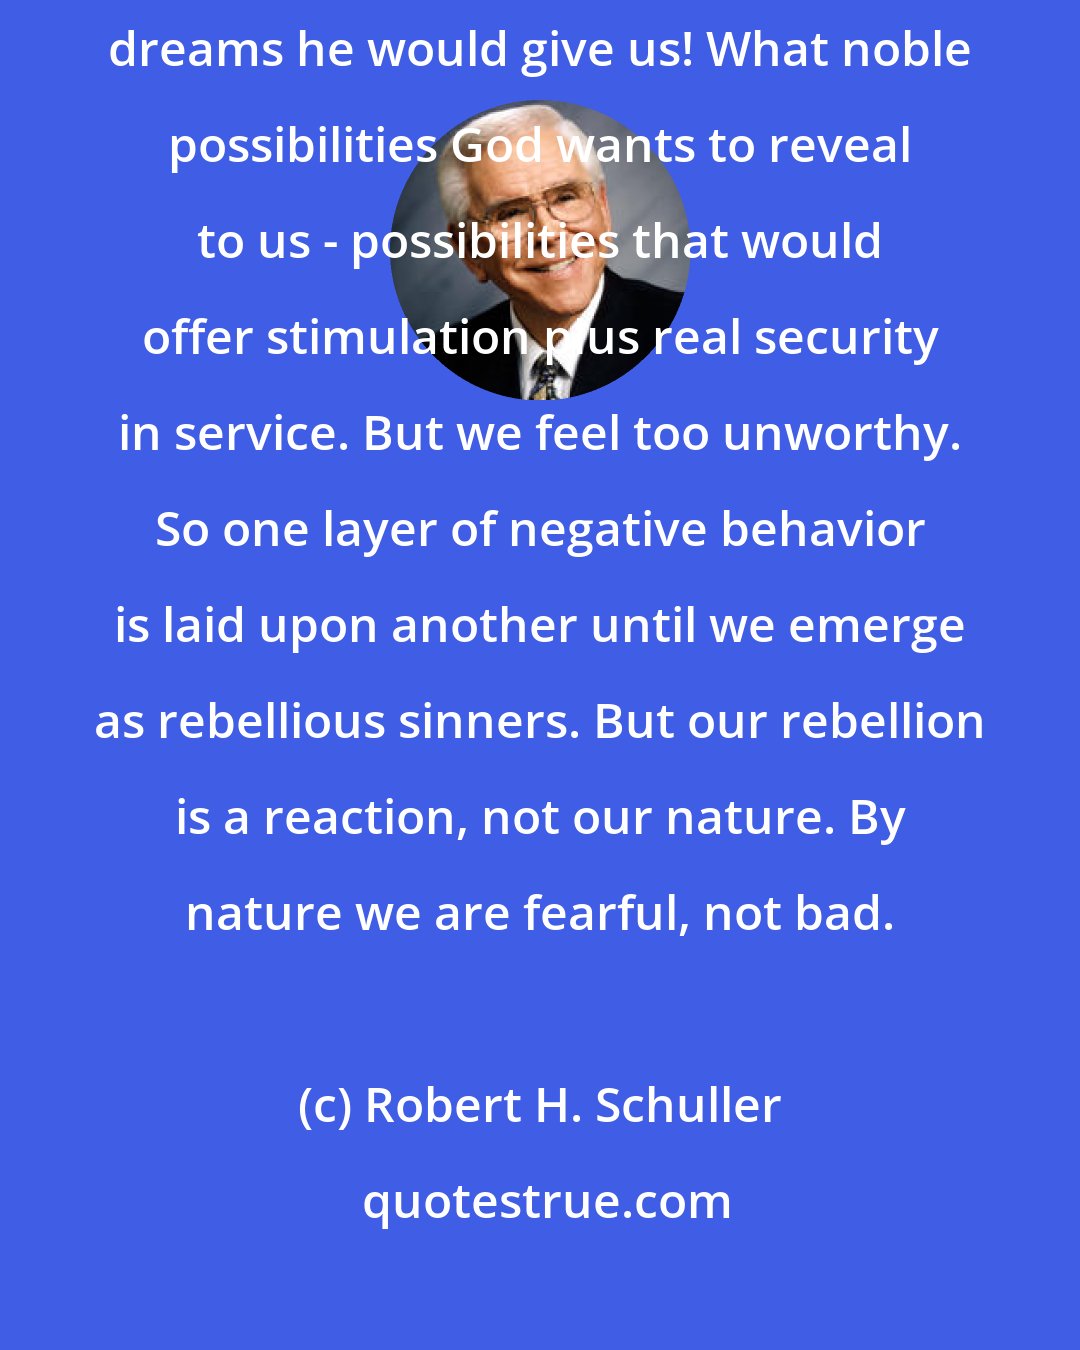 Robert H. Schuller: If only we could love ourselves enough to dare to approach God, what constructive dreams he would give us! What noble possibilities God wants to reveal to us - possibilities that would offer stimulation plus real security in service. But we feel too unworthy. So one layer of negative behavior is laid upon another until we emerge as rebellious sinners. But our rebellion is a reaction, not our nature. By nature we are fearful, not bad.